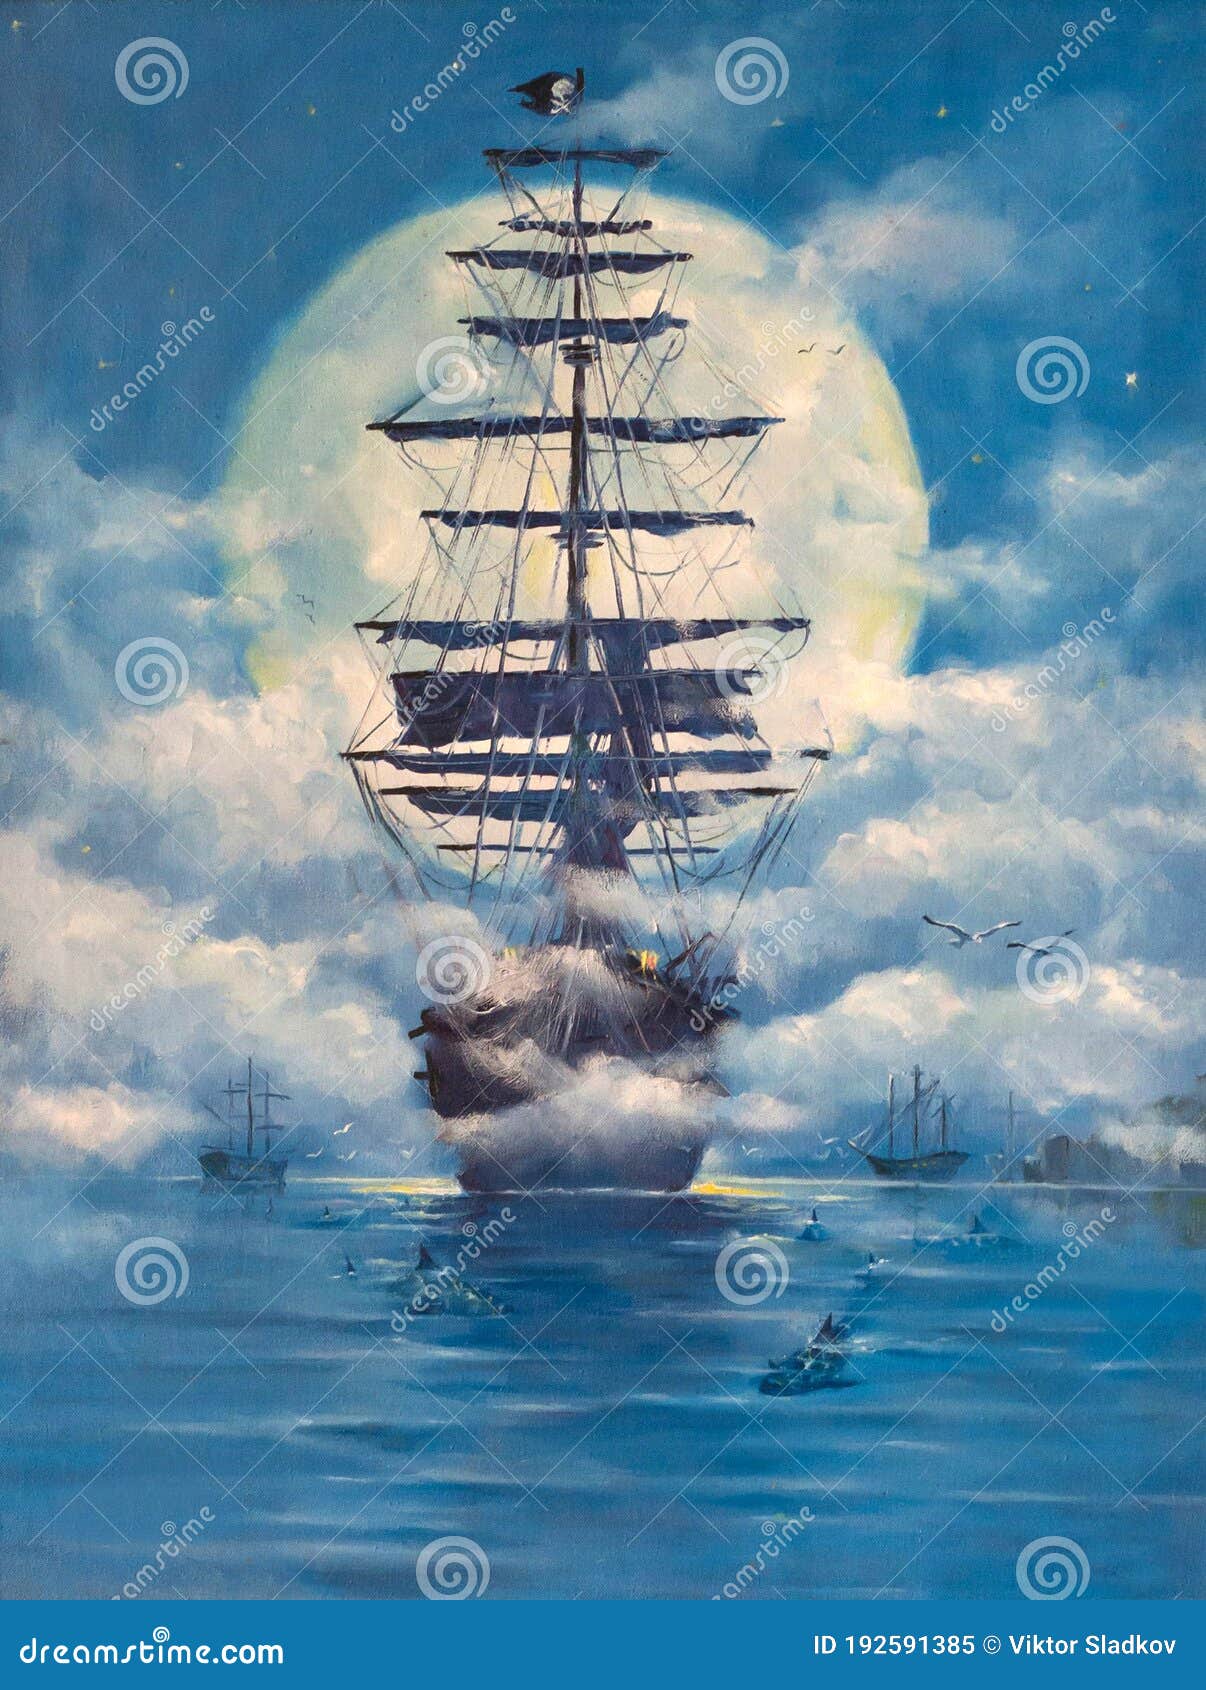 Pirate ship oil painting stock image. Image of paint - 192591385